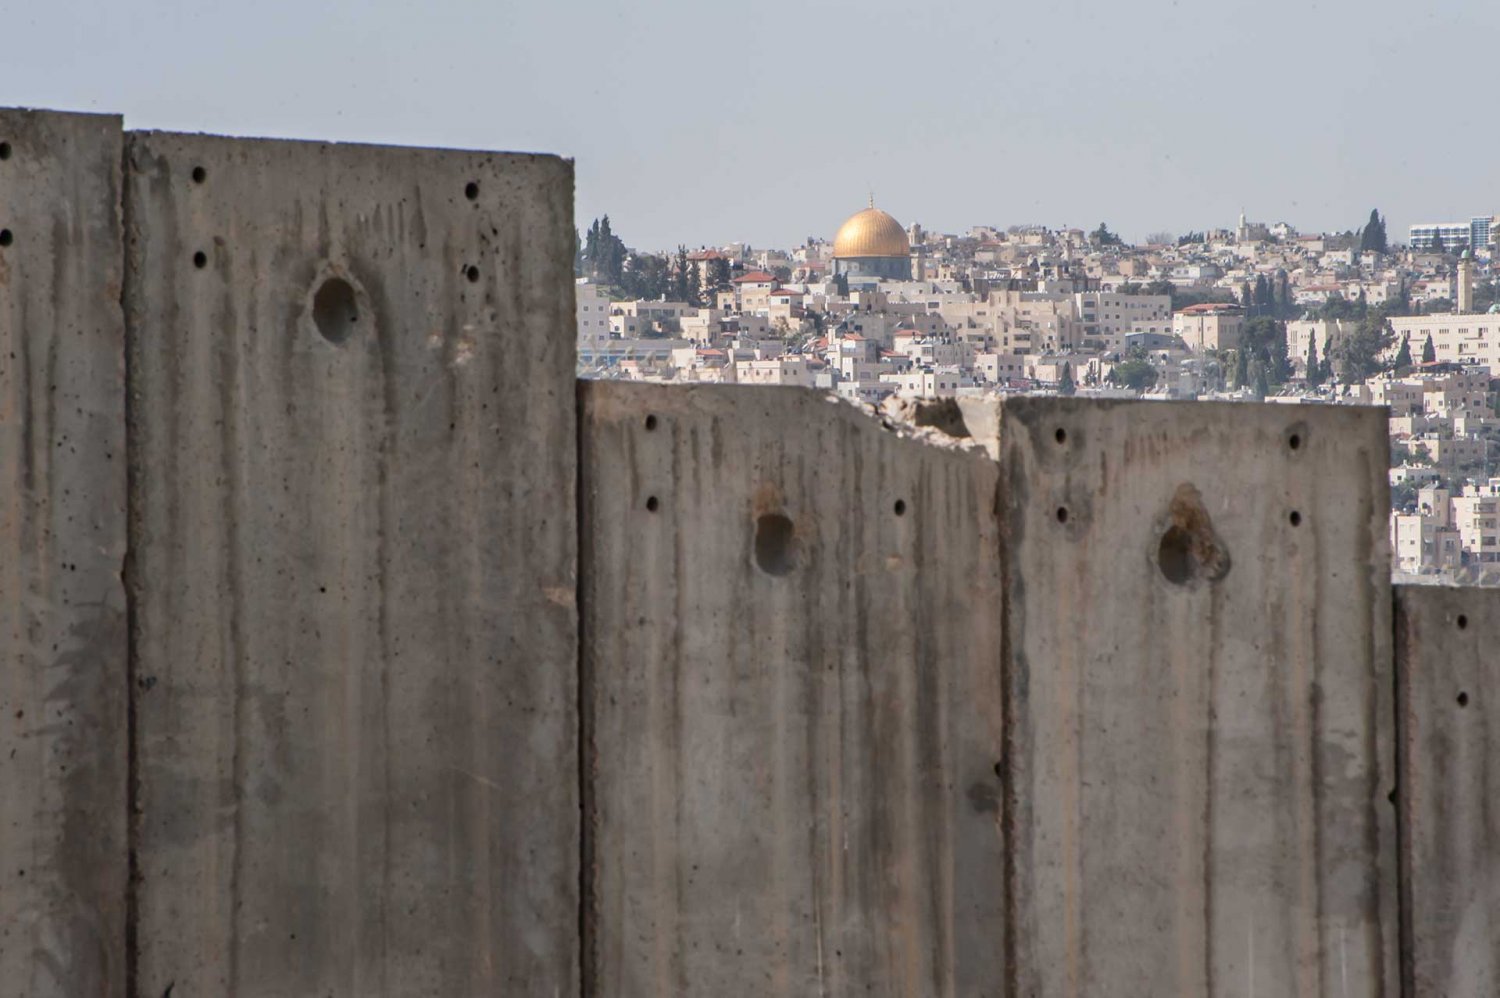 The Dome of the Rock is visible over the Israeli Separation Wall dividing East Jerusalem